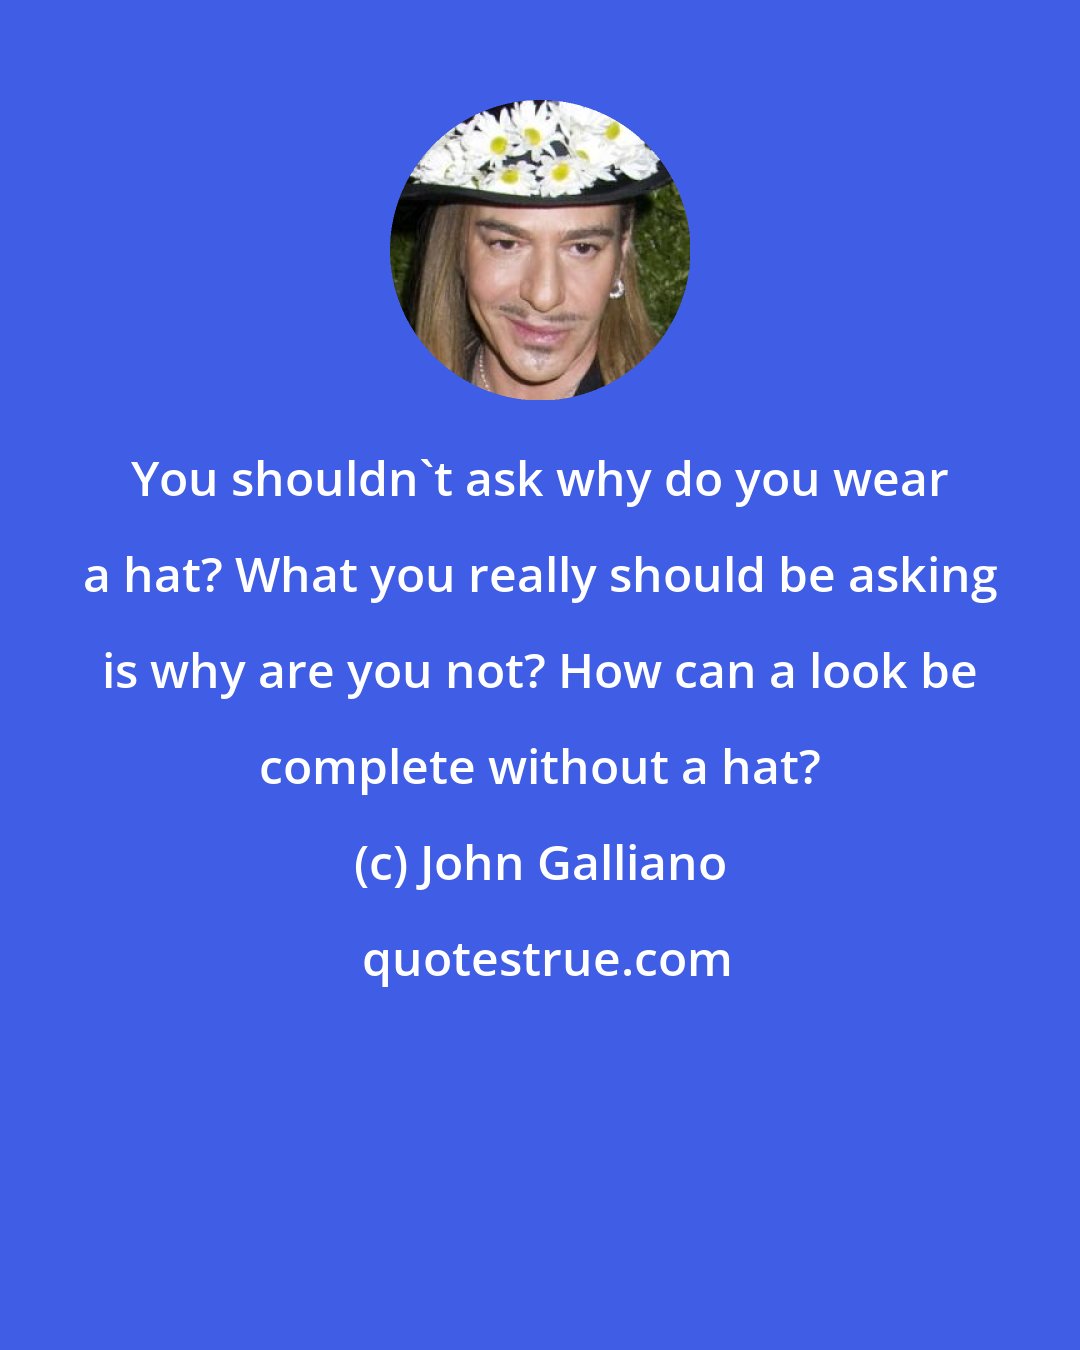 John Galliano: You shouldn't ask why do you wear a hat? What you really should be asking is why are you not? How can a look be complete without a hat?